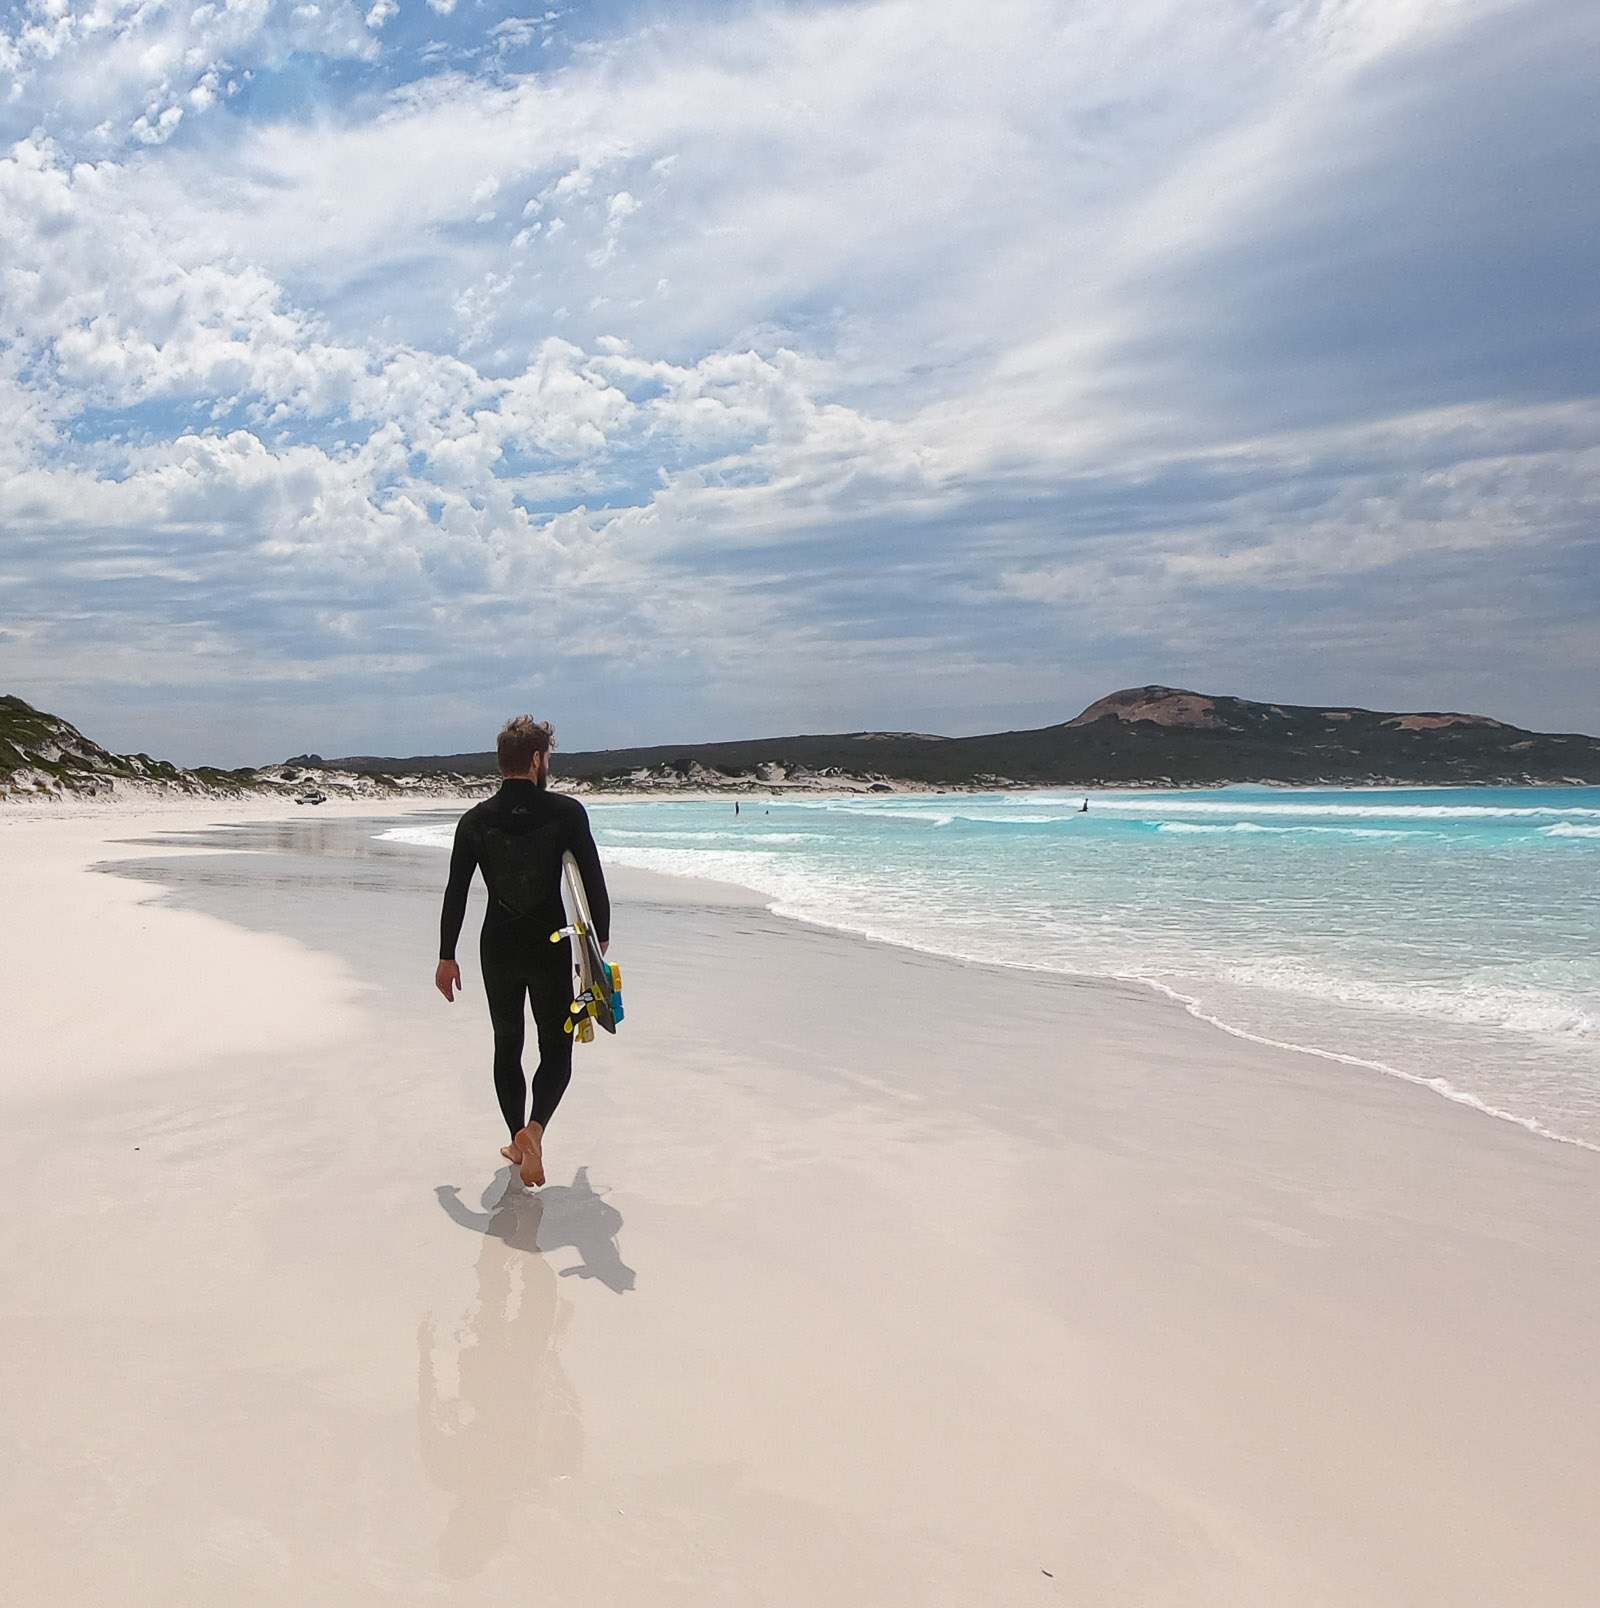 A surfer walking along a white sand beach with turquoise waves lapping the shore 